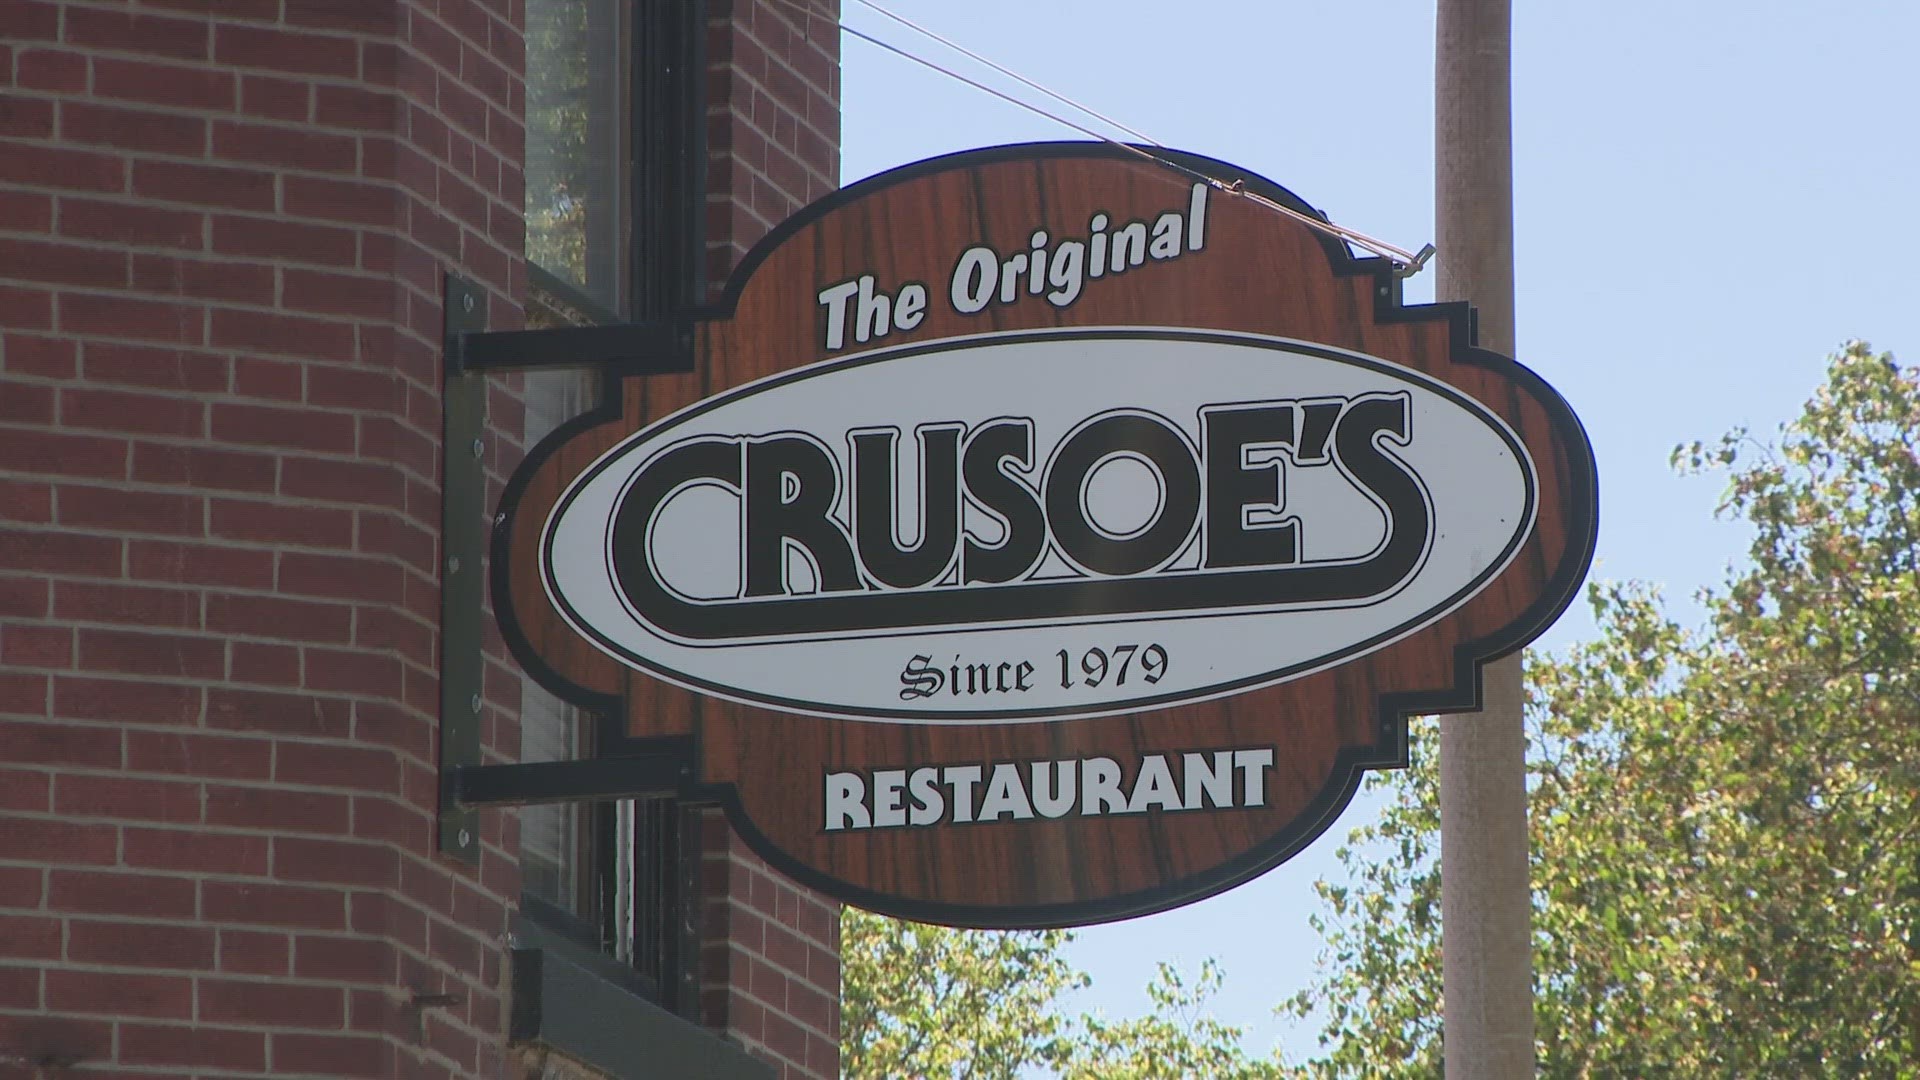 A family-owned restaurant, Original Crusoe's, has been open for over 40 years but will close its doors. Owners cited a rough summer as the reason.